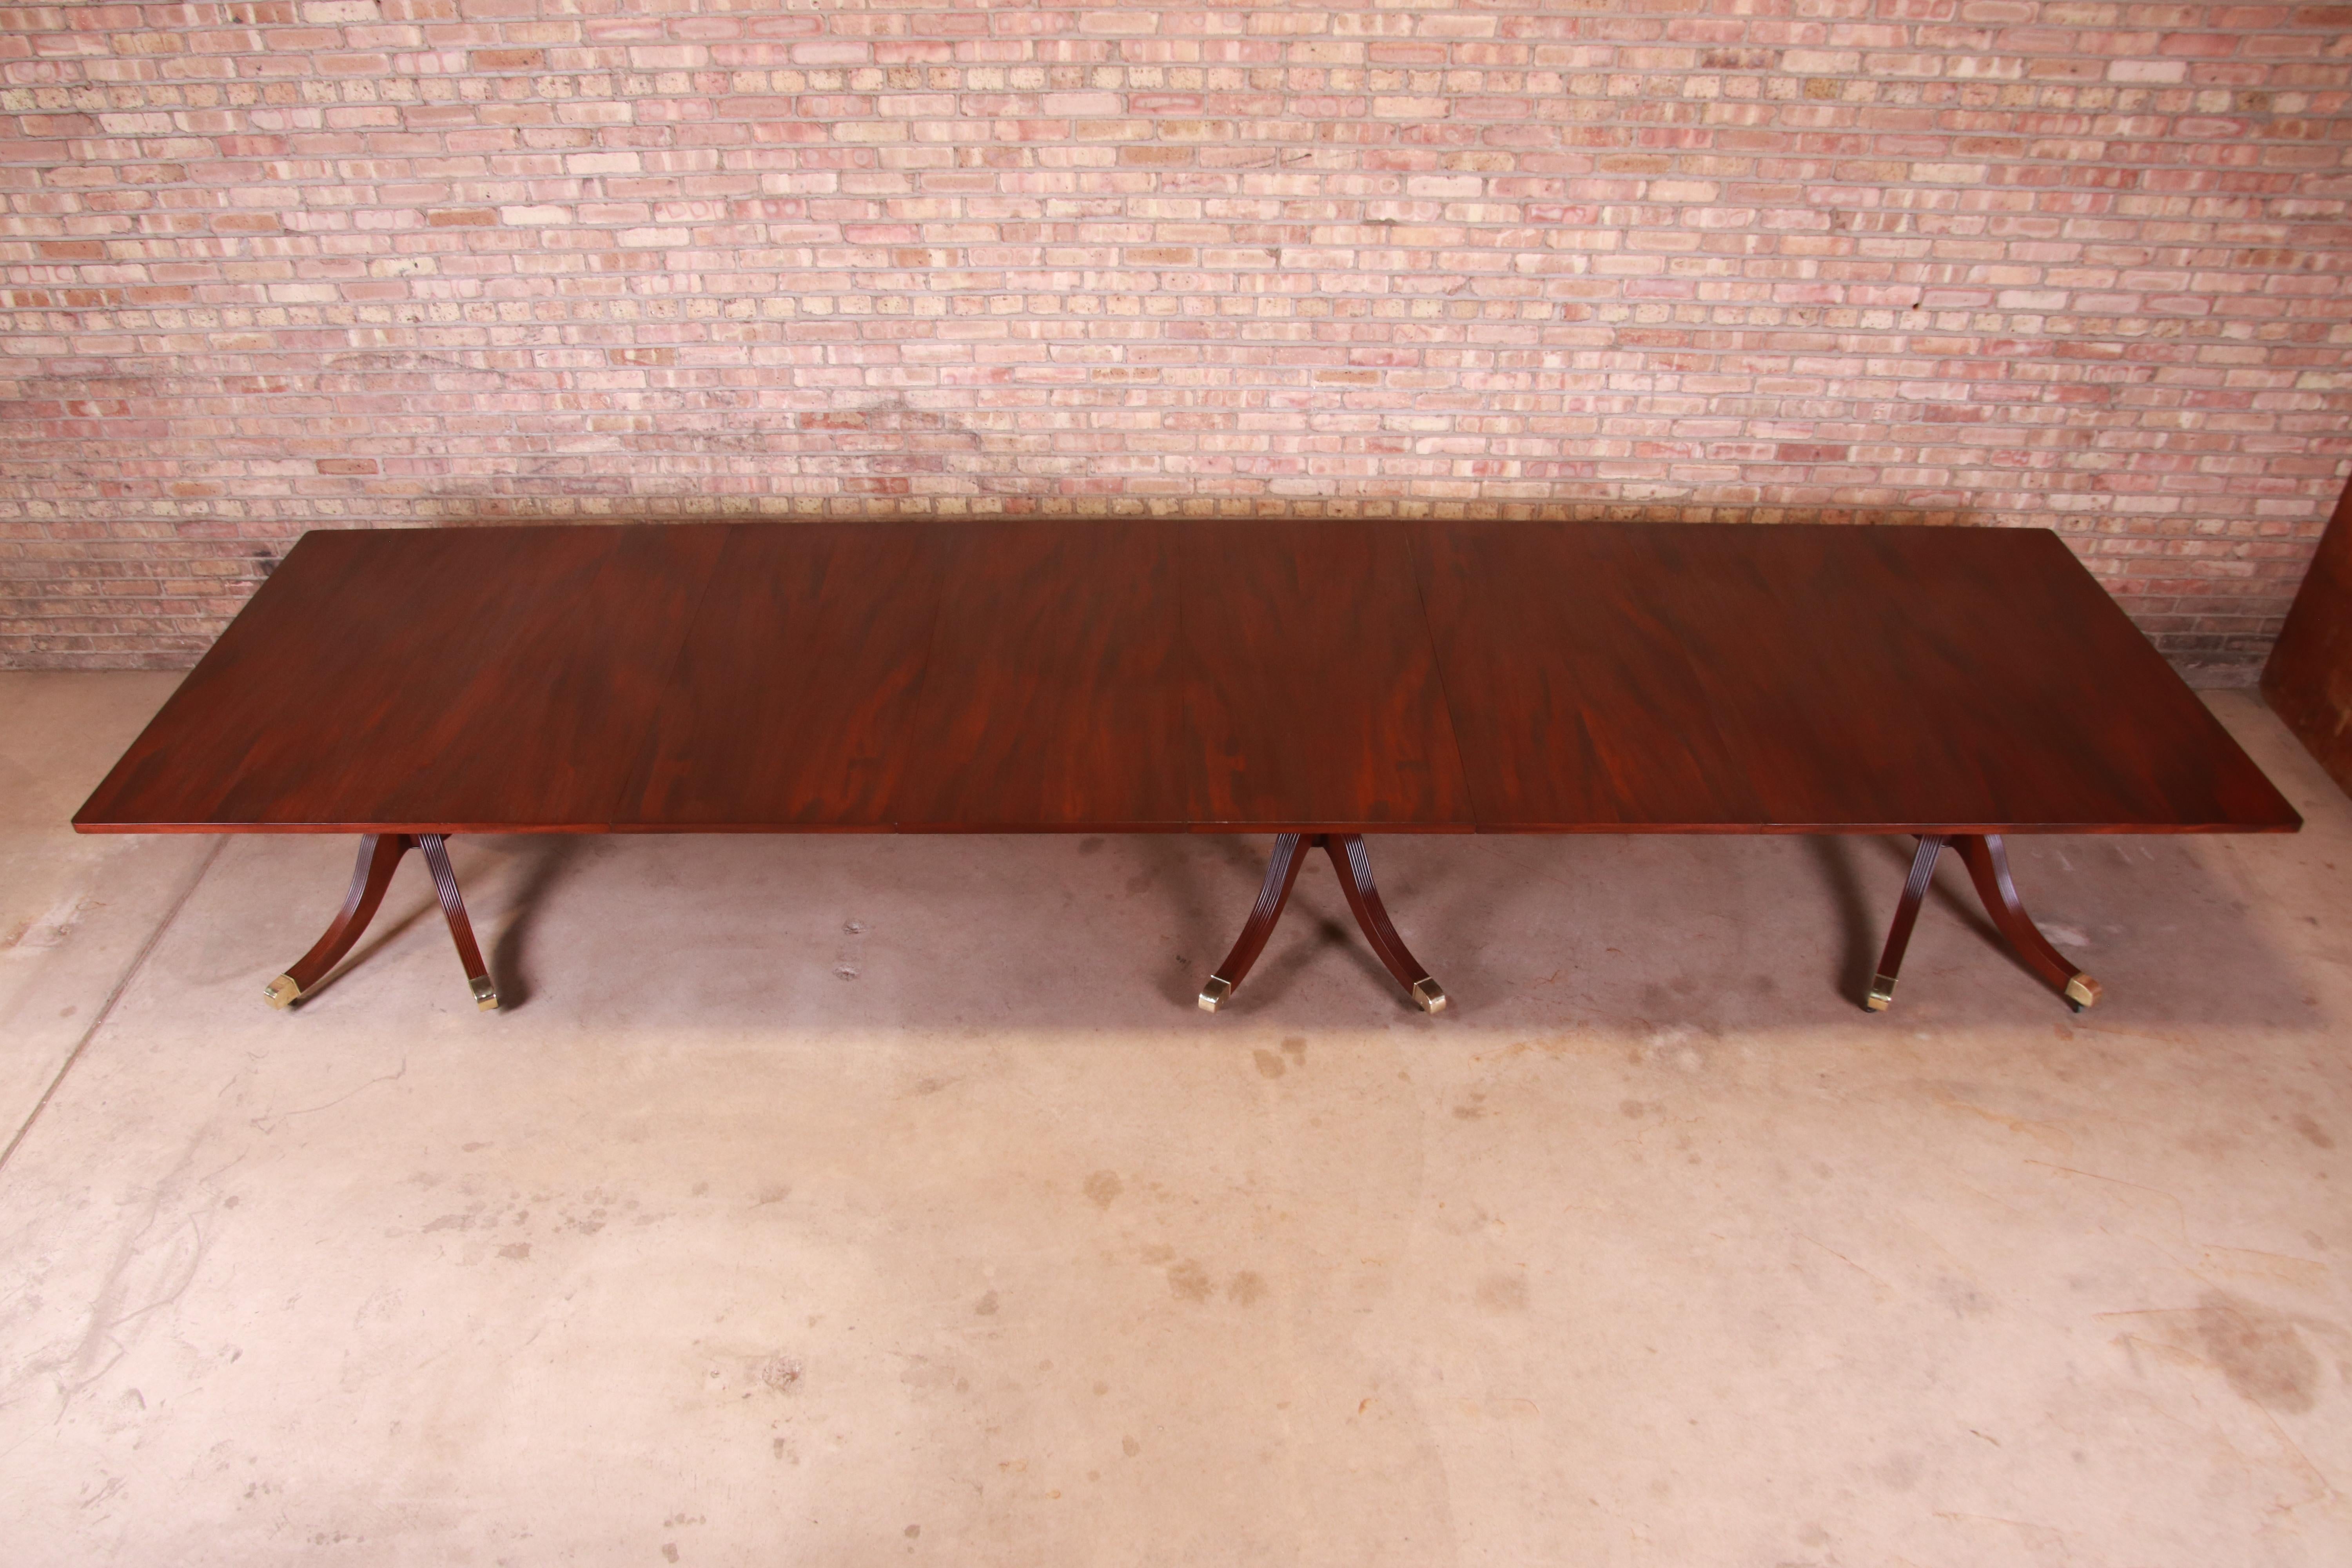 20th Century Monumental Georgian Mahogany Triple Pedestal Dining or Banquet Table, Refinished